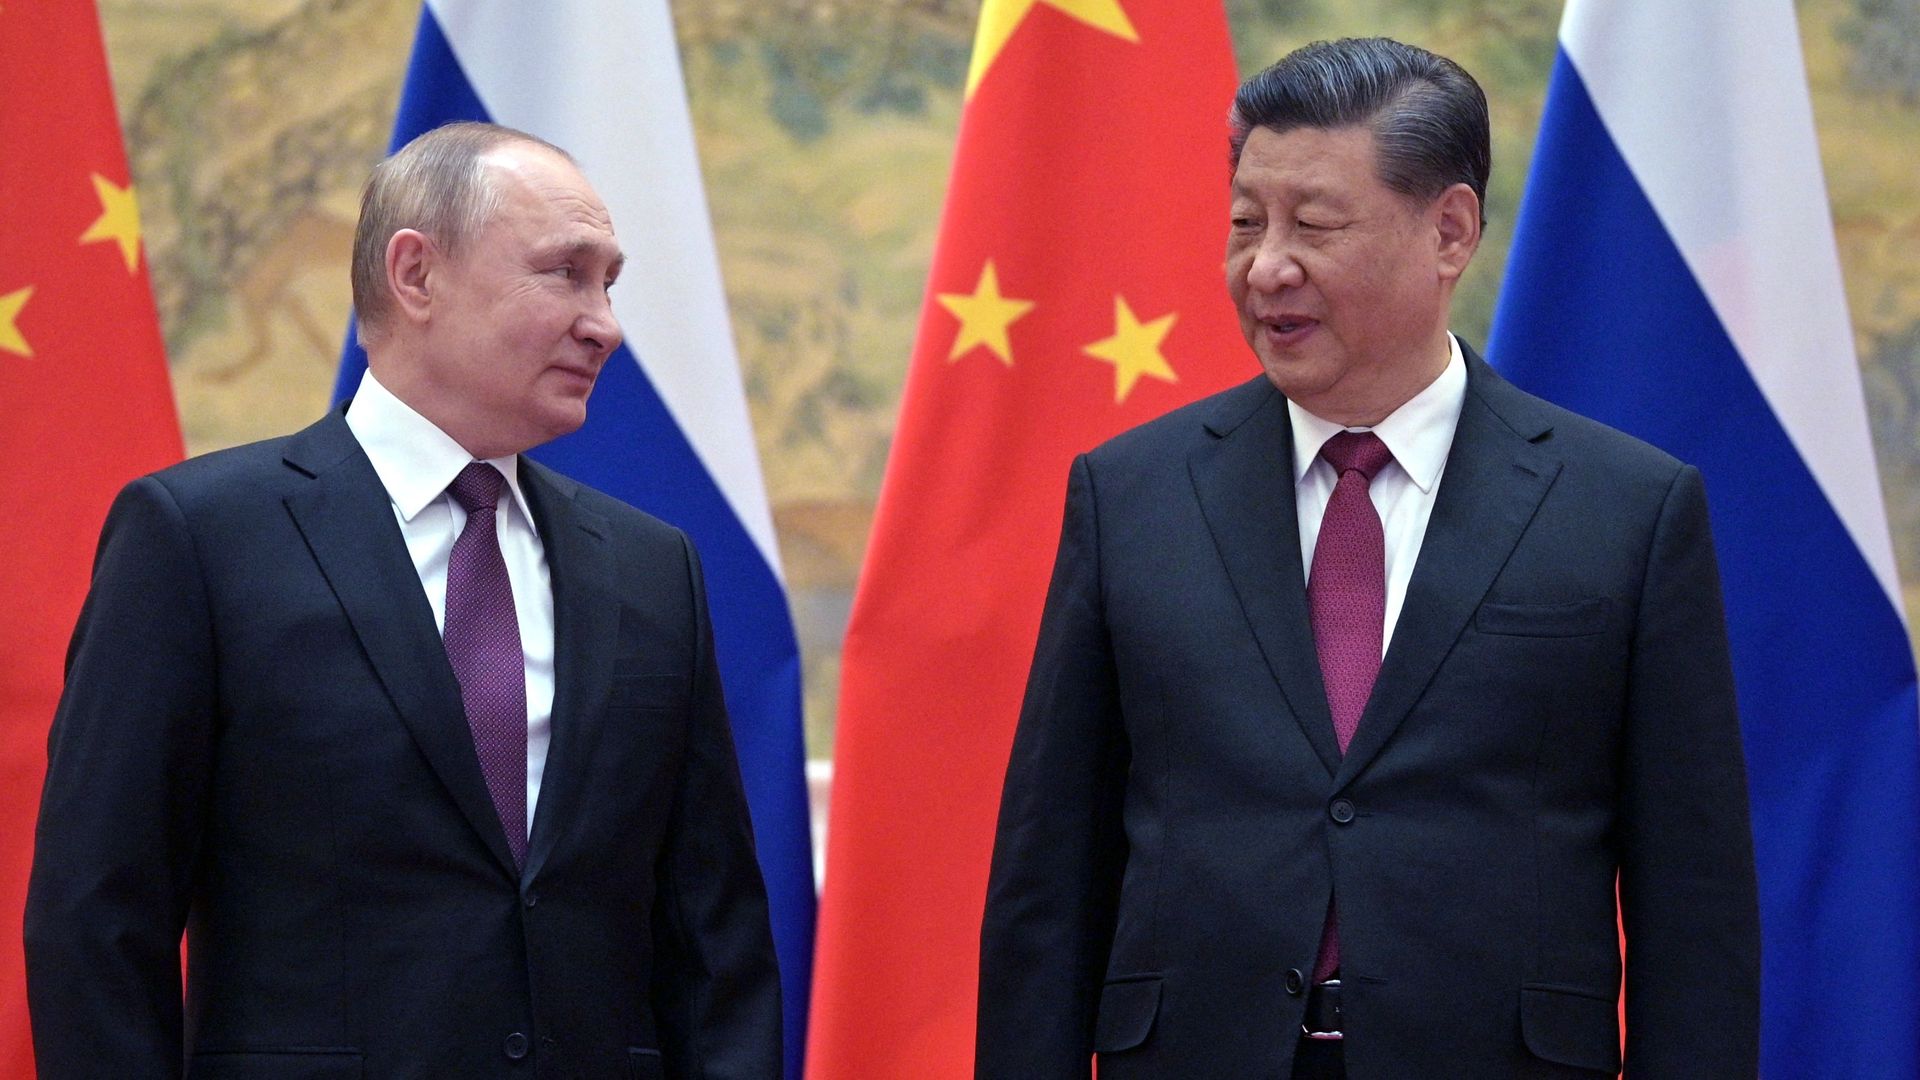 Russian President Vladimir Putin (L) and Chinese President Xi Jinping  during their meeting in Beijing, on February 4, 2022.